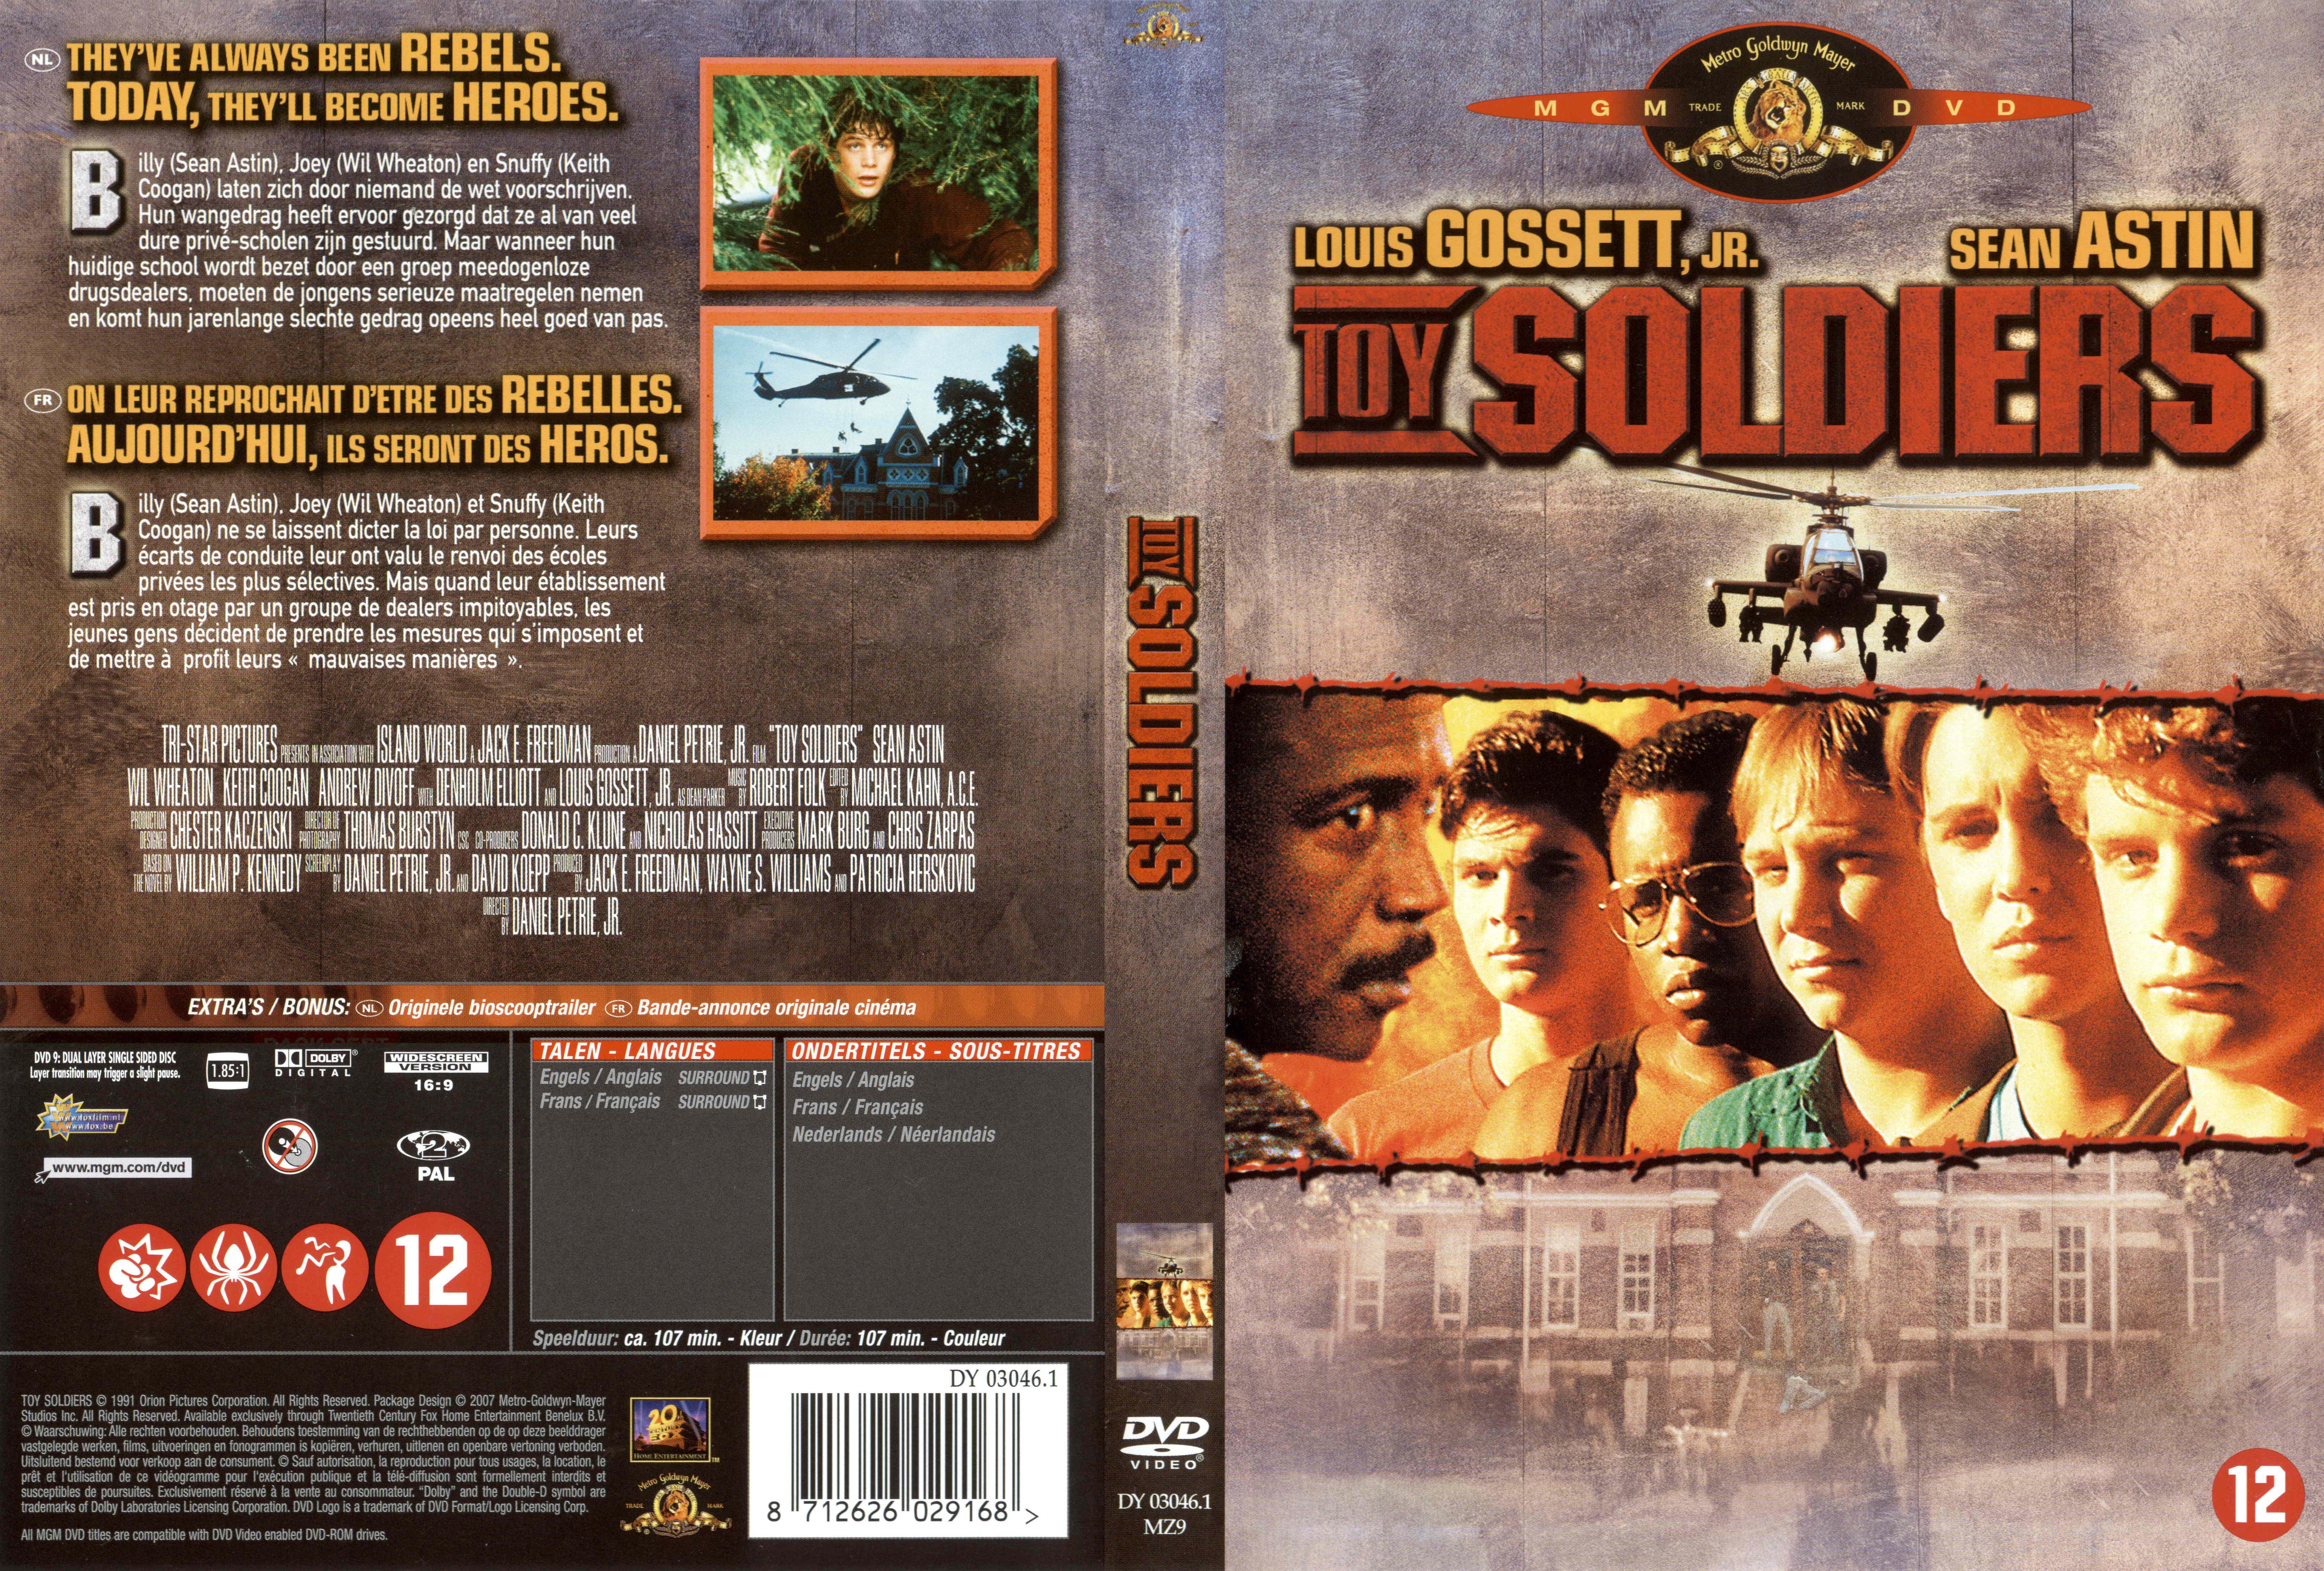 Jaquette DVD Toy soldiers v2